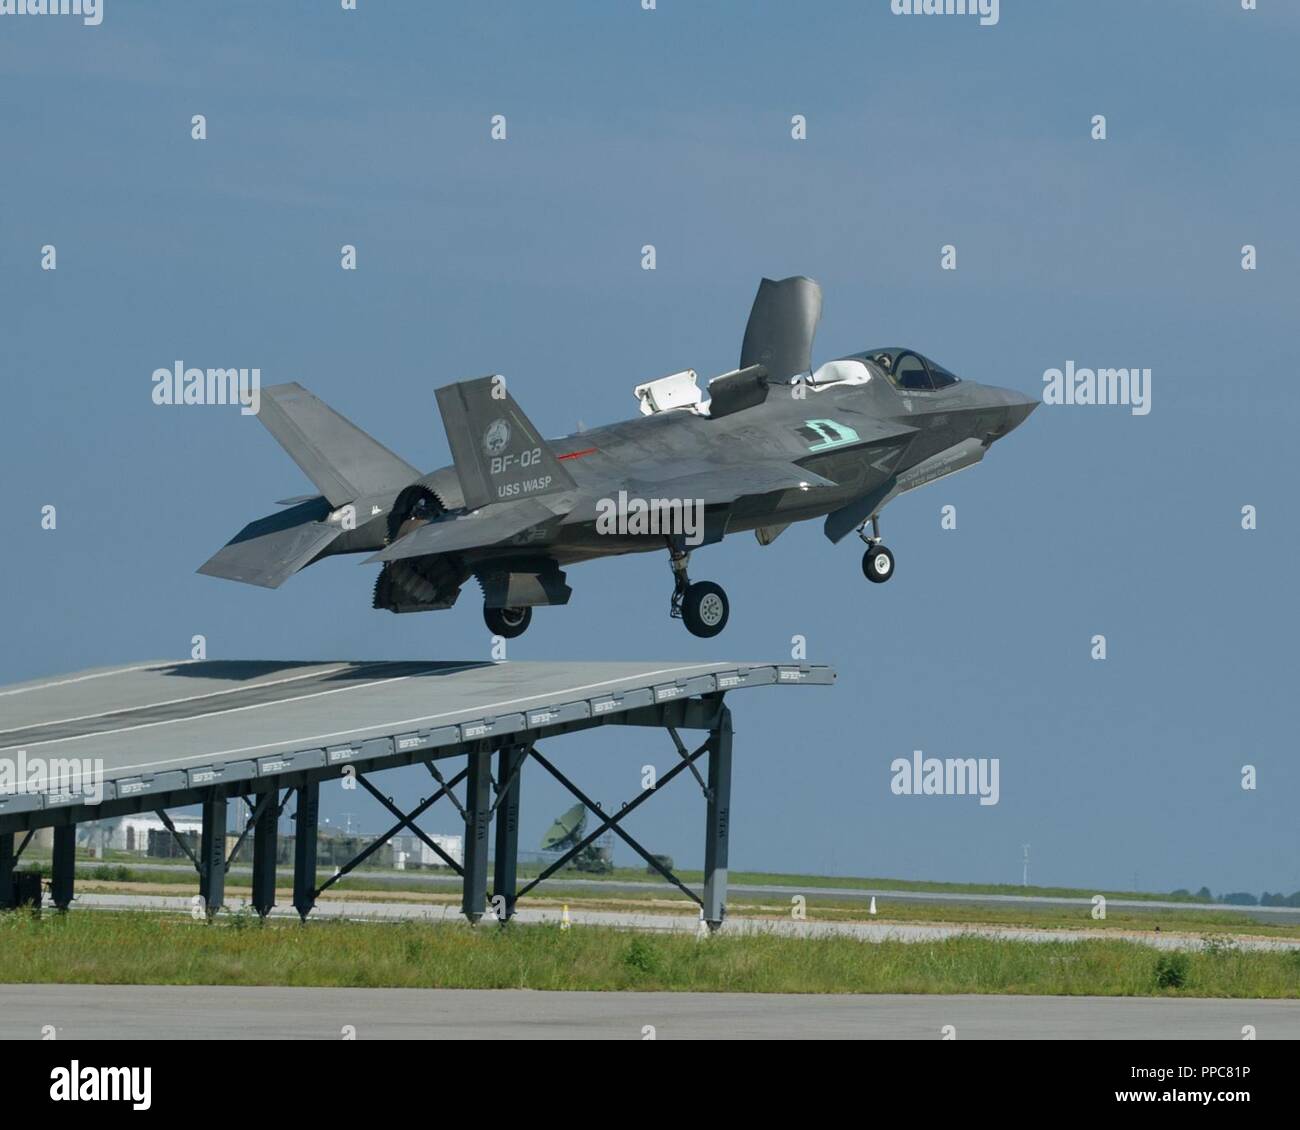 Peter 'Wizzer' Wilson, BAE test pilot at the F-35 Pax River Integrated Test Force, performs a ski jump Aug. 15, 2018, at NAS Patuxent River with an F-35B test jet as part of the workups to prepare for First of Class Flight Trials (Fixed Wing) aboard HMS Queen Elizabeth.  Around 200 supporting staff from the ITF, including pilots, engineers, maintainers and data analysts, will take two F-35Bs test aircraft aboard to evaluate the fifth-generation aircraft performance and integration with Royal Navy’s newest aircraft carrier this fall. This fixed wing test period brings the U.K. one step closer t Stock Photo